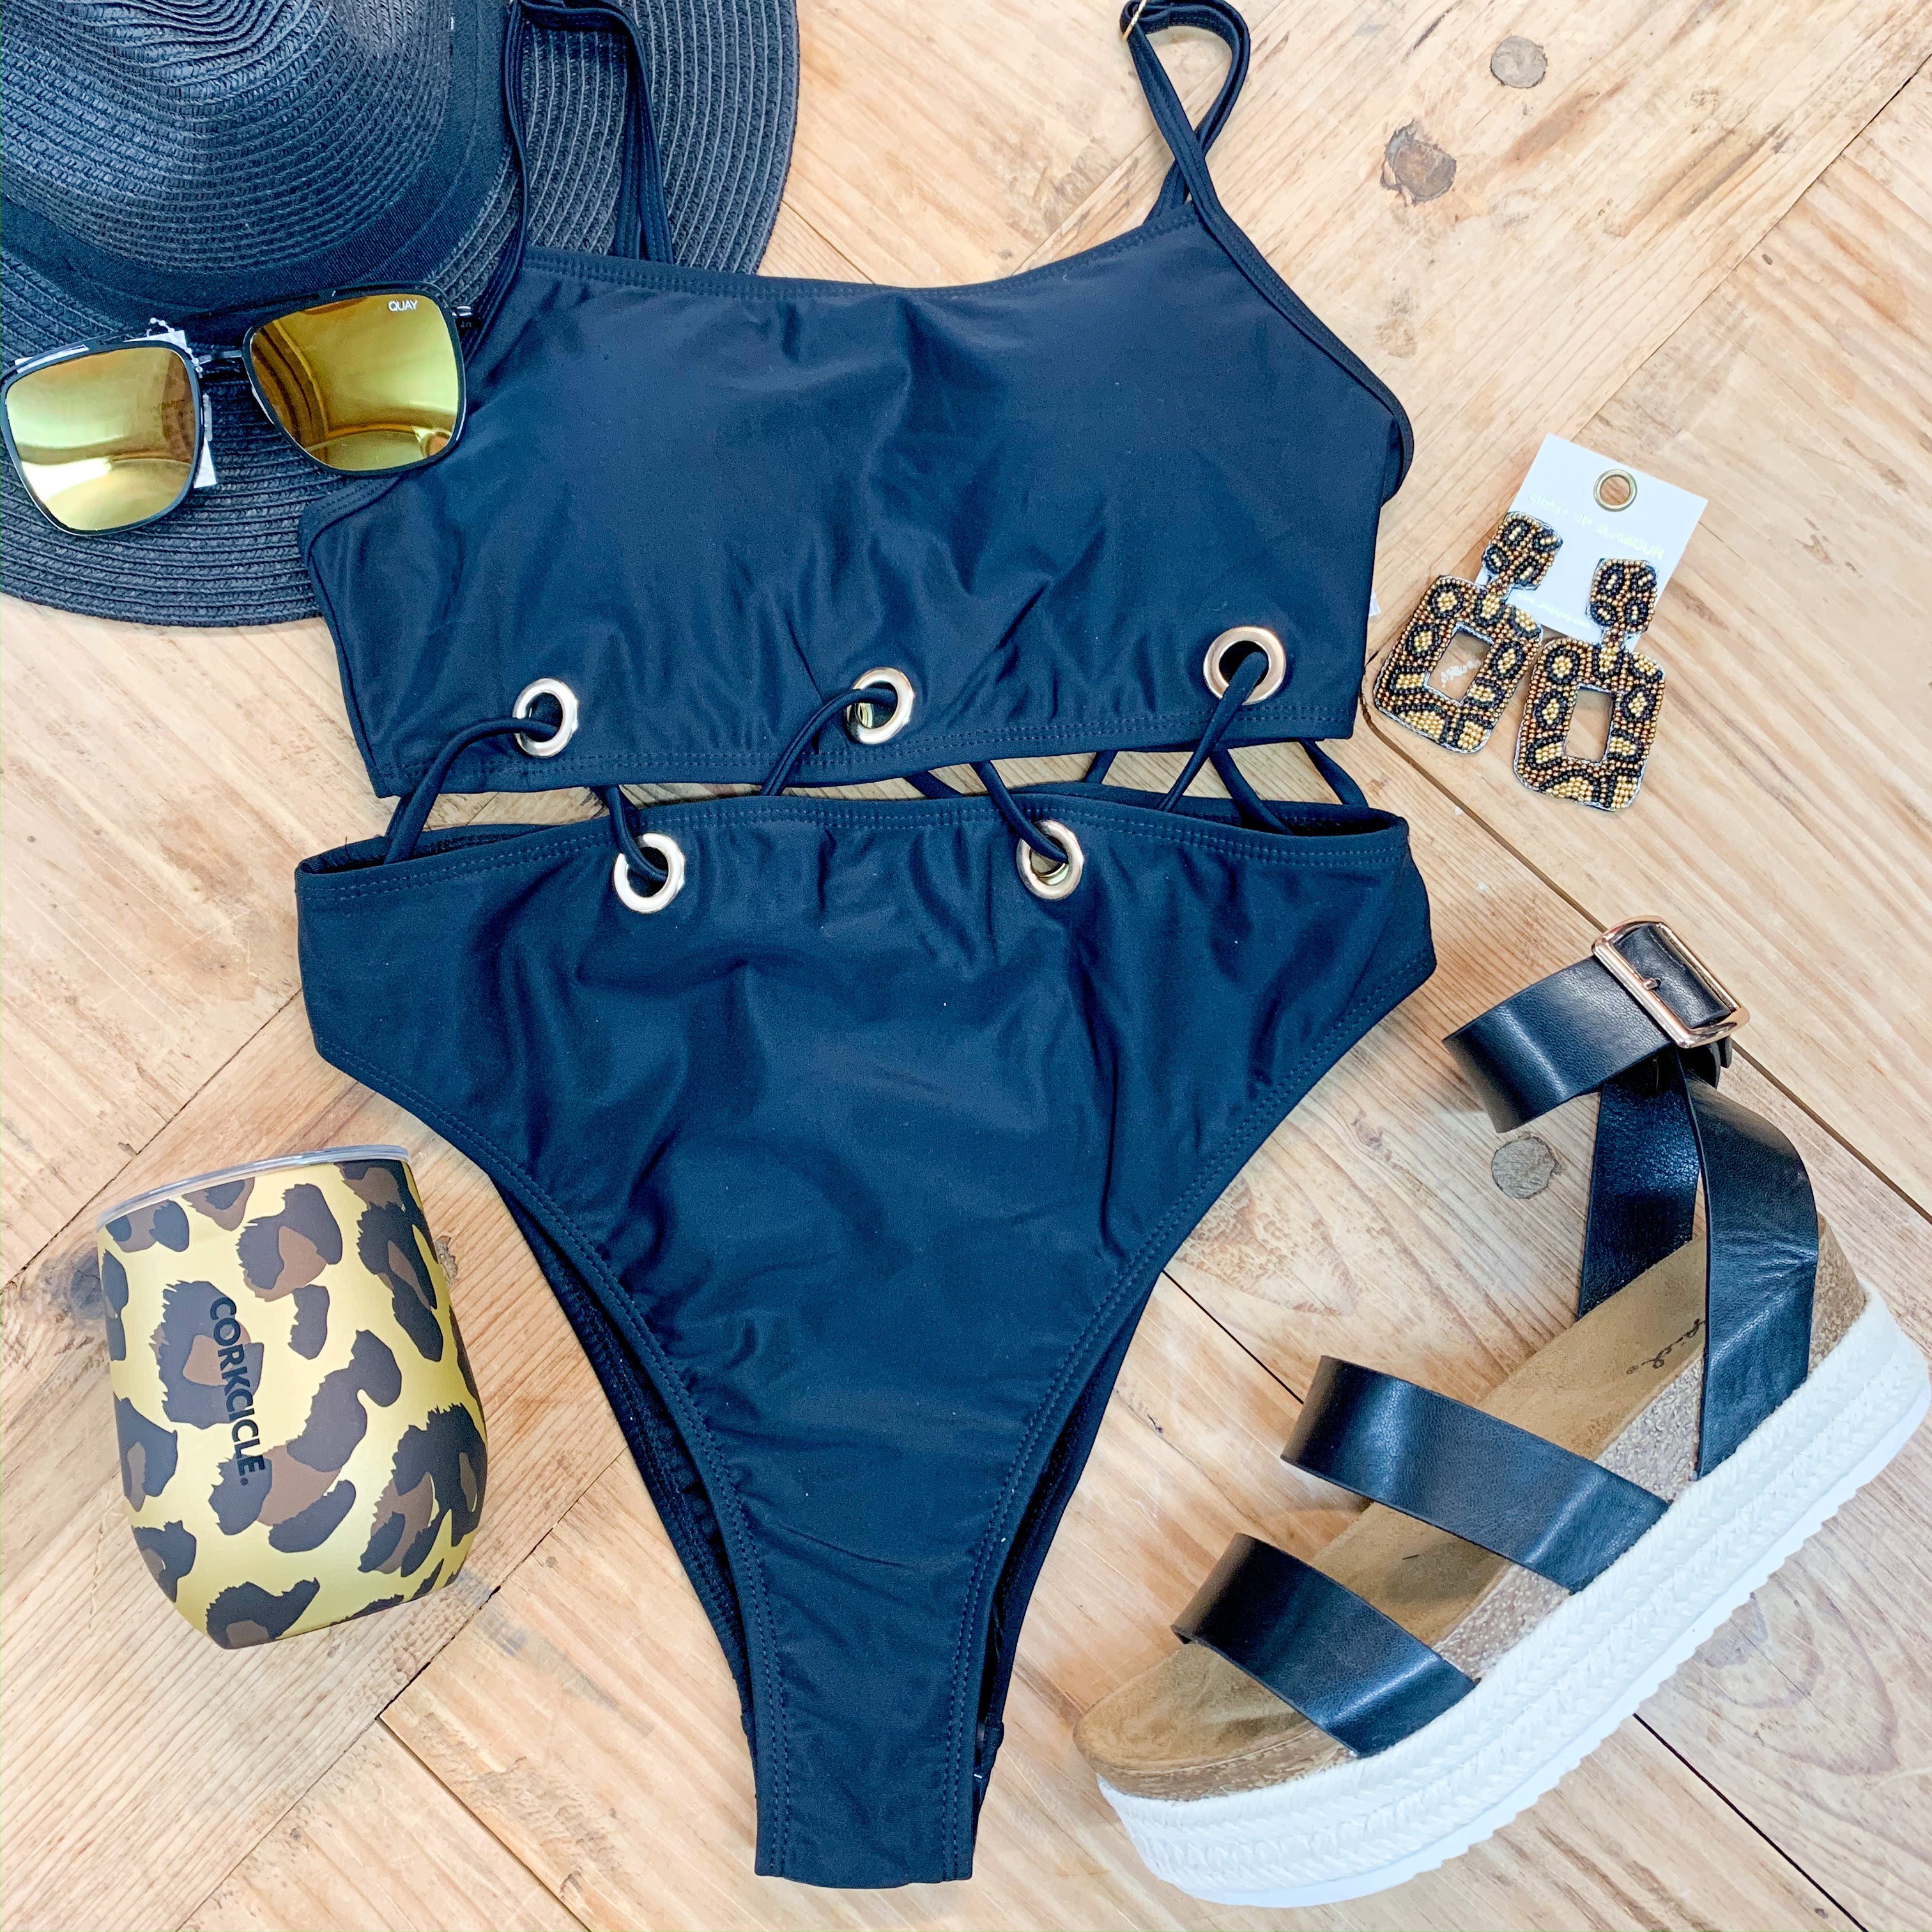 Sandy Days Criss Cross Attached One Piece Swimsuit in Black - Giddy Up Glamour Boutique